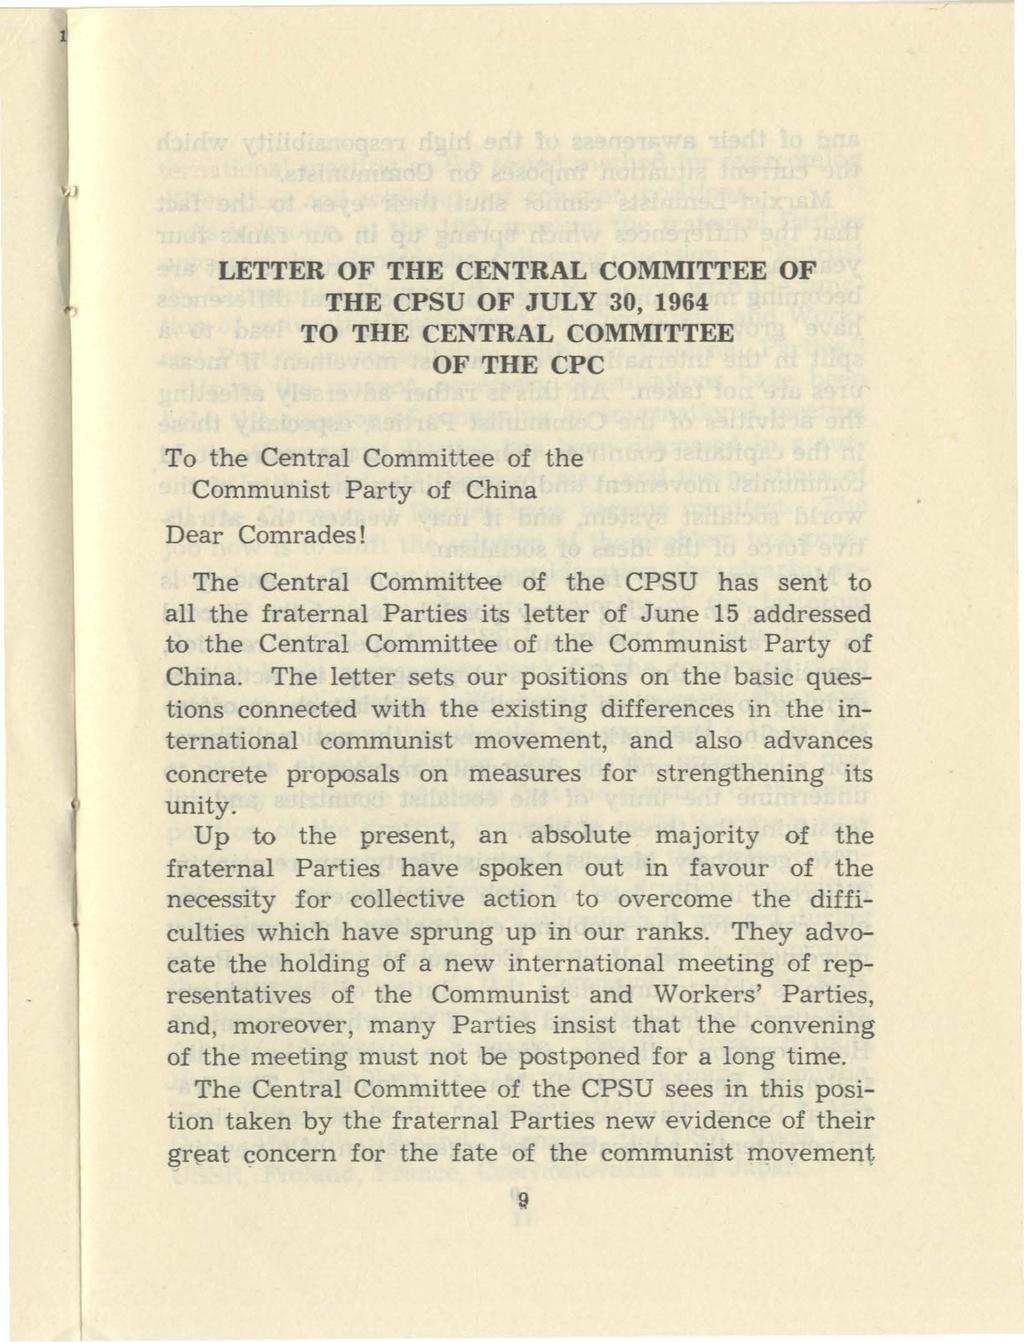 1 LETTER OF THE CENTRAL COMMITTEE OF THE CPSU OF JULY 30, 1964 TO THE CENTRAL COMMITTEE OF THE CPC To the Central Committee of the Communist Party of China Dear Comrades!